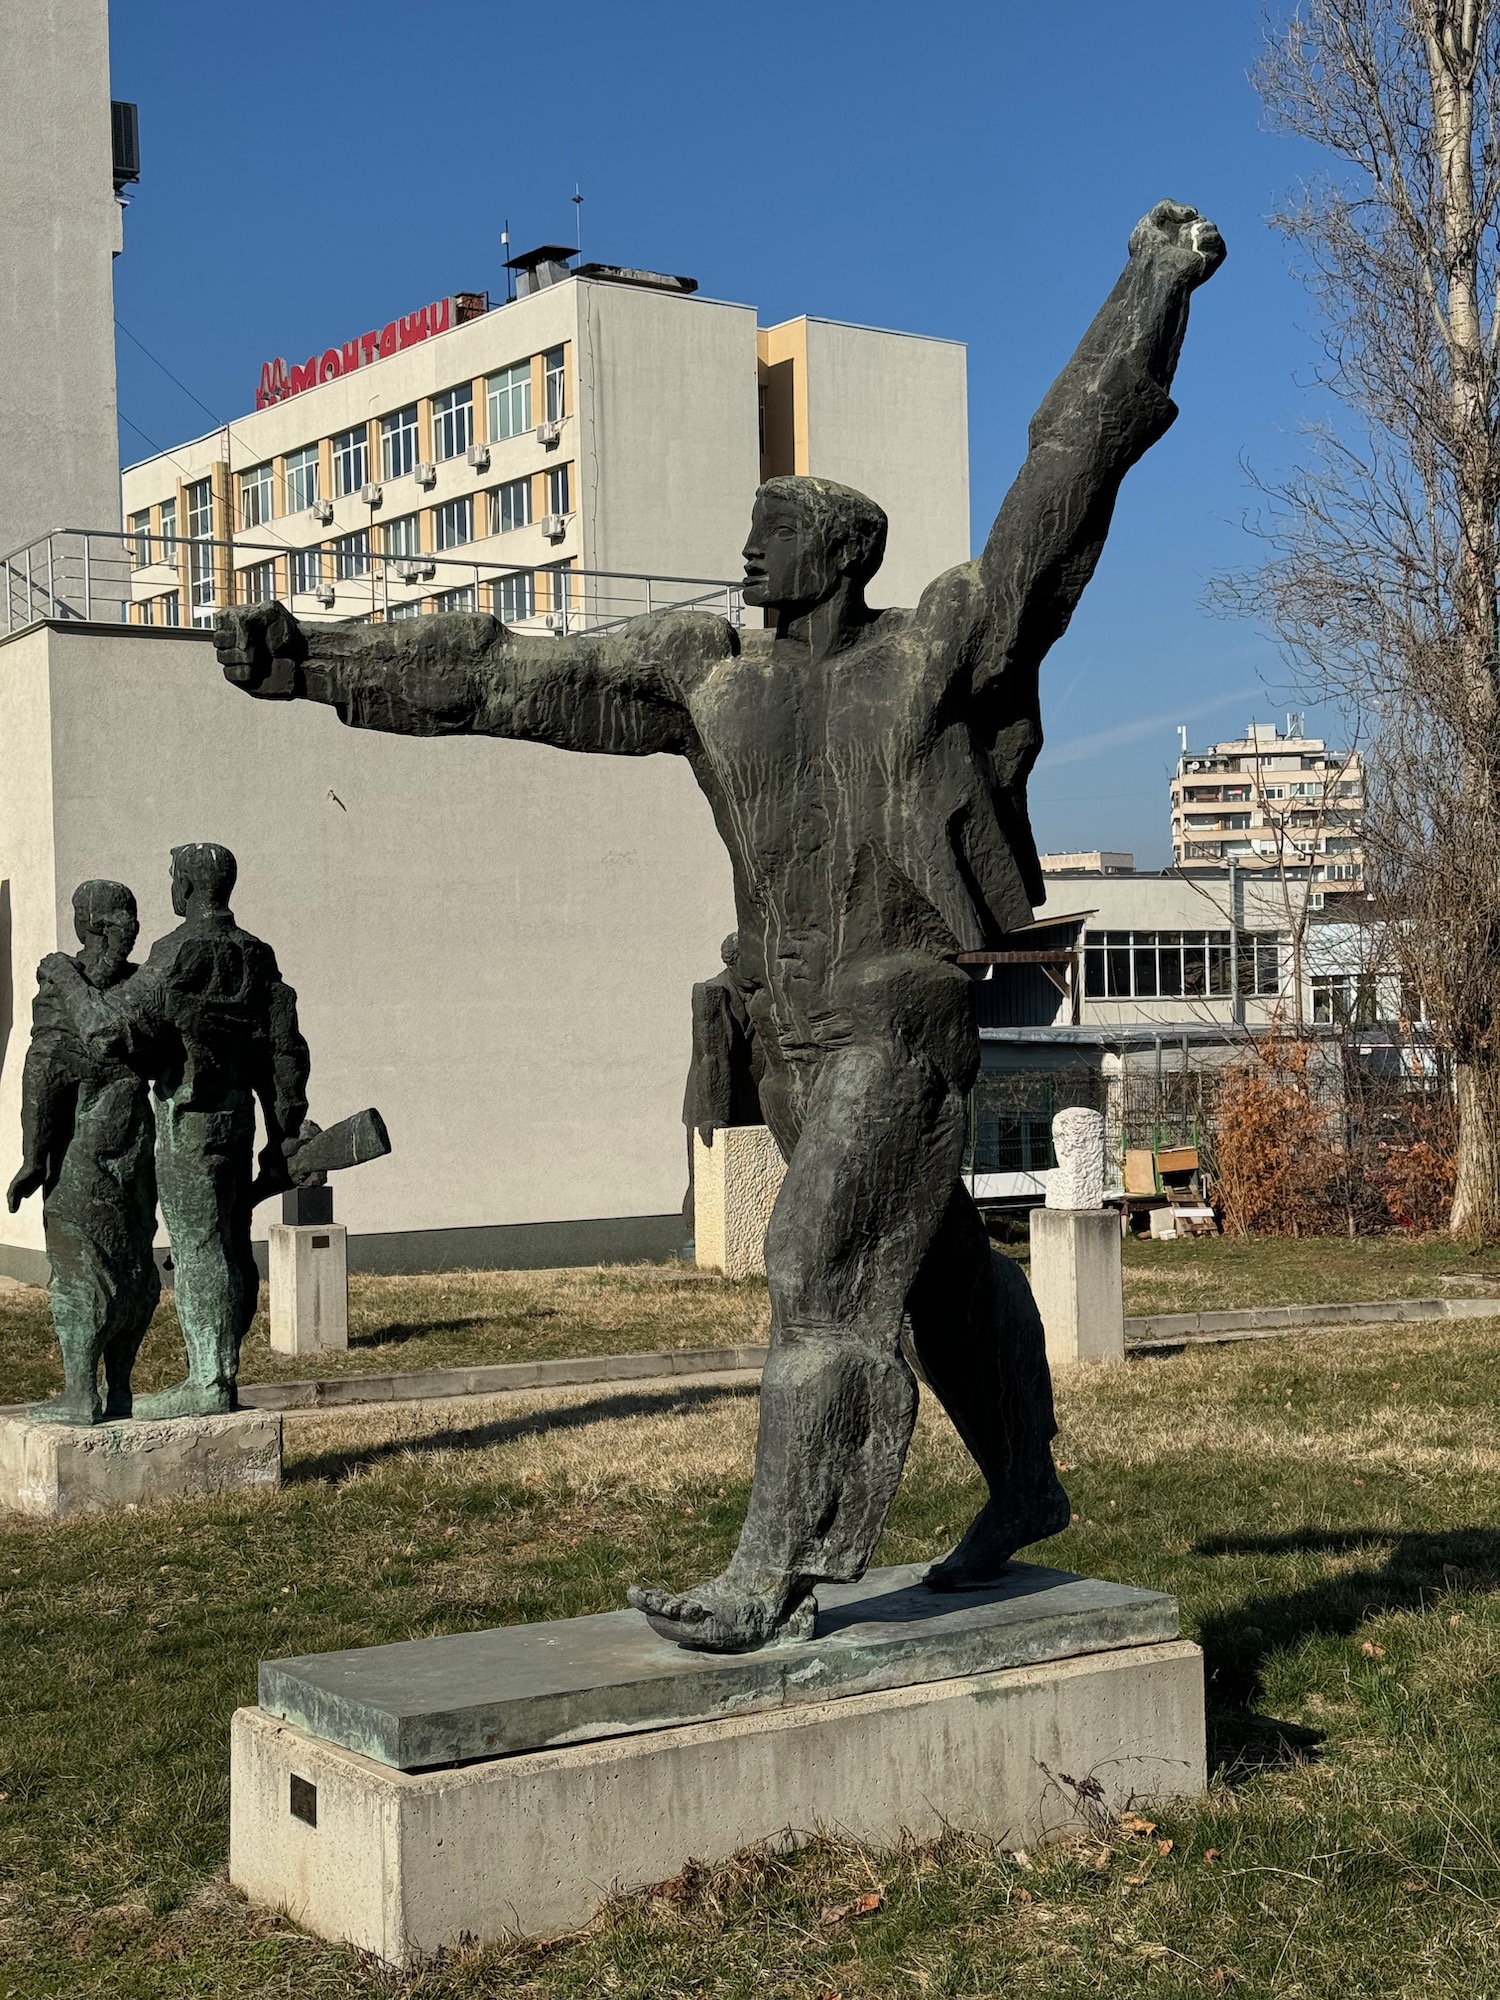 a statue of a man with his arms raised